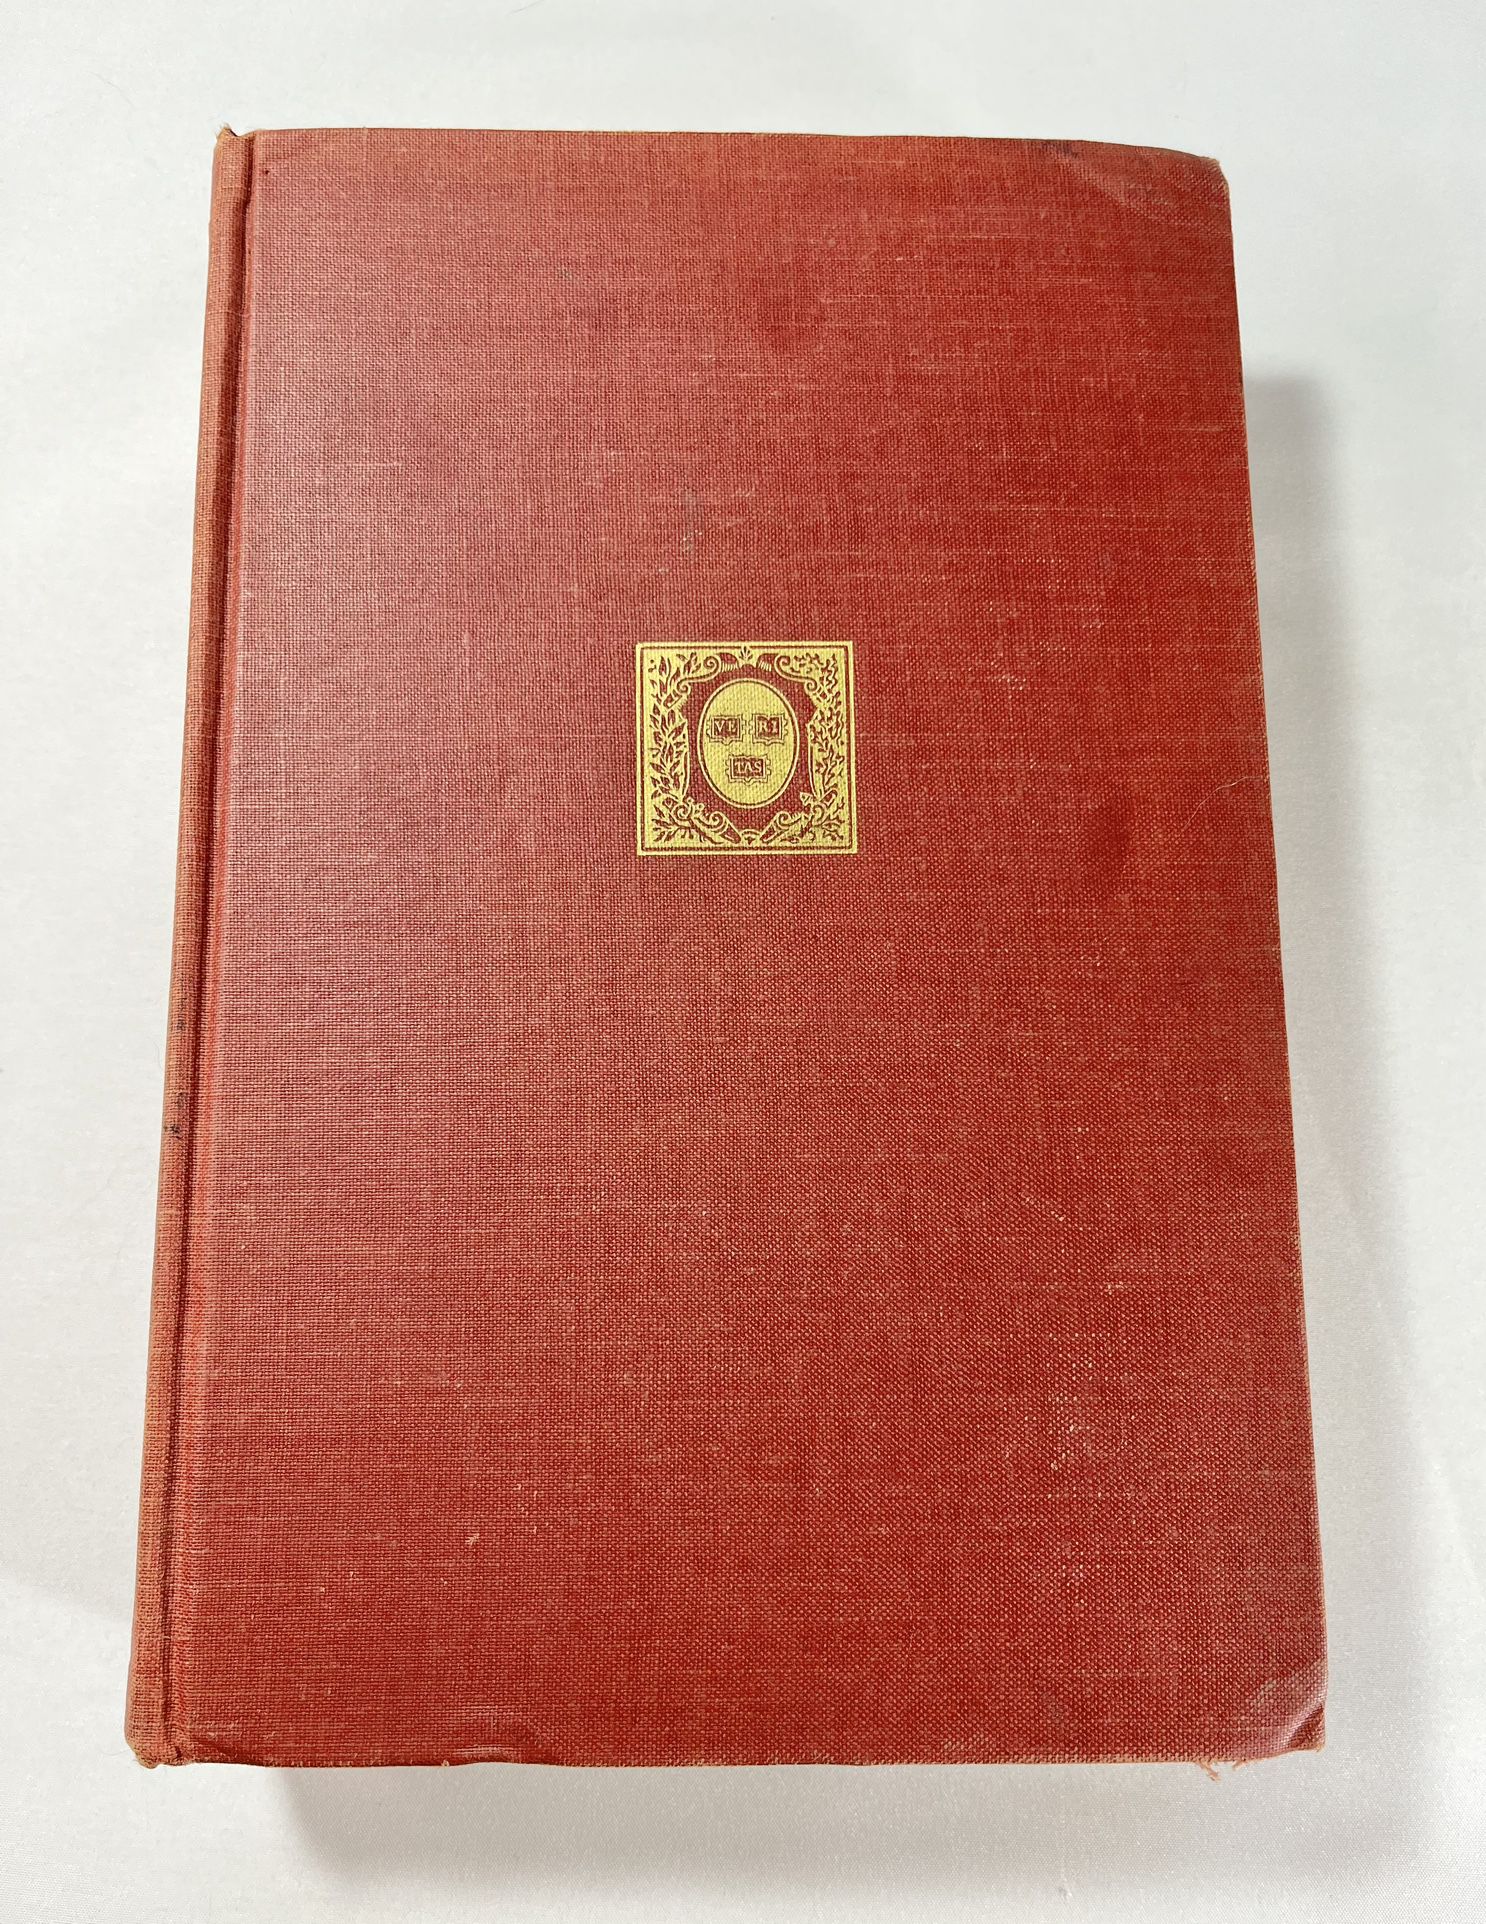 Vintage Harvard Dictionary Of Music 5th Printing 1947 Hardcover